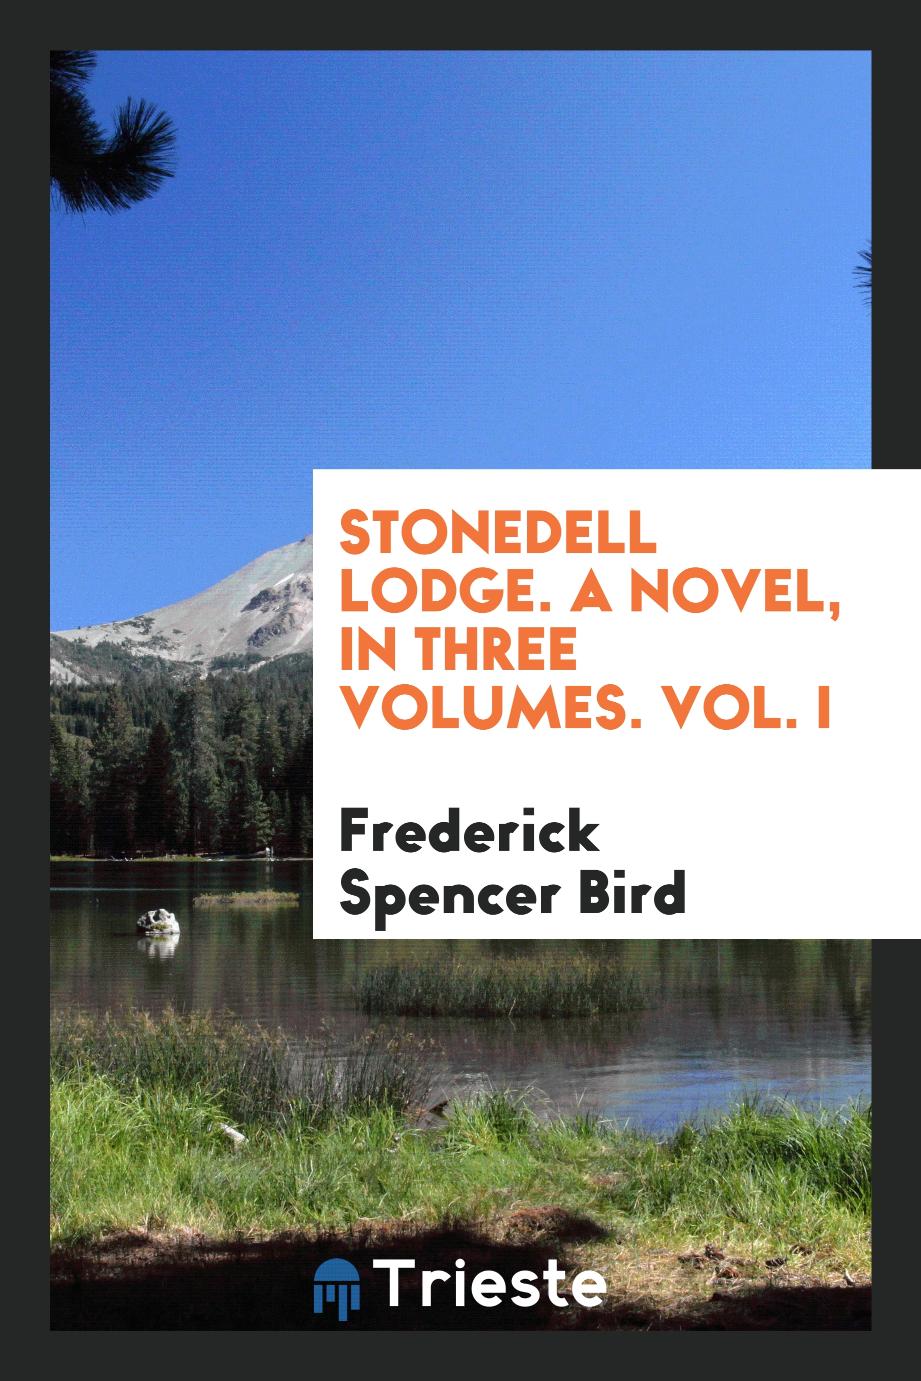 Stonedell Lodge. A novel, in three volumes. Vol. I